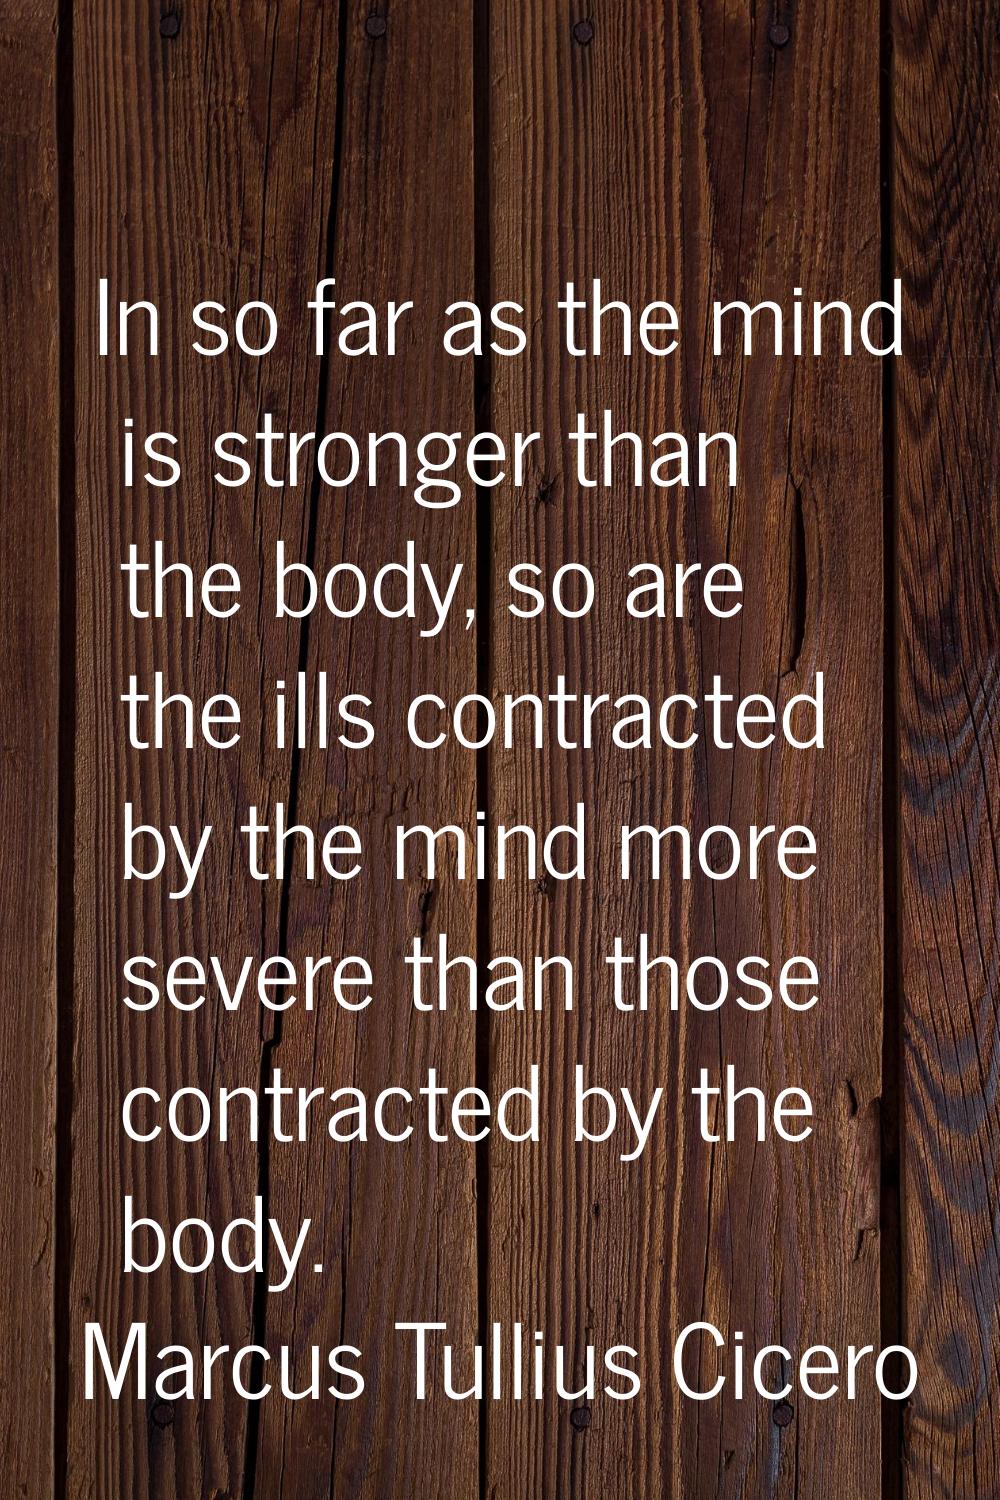 In so far as the mind is stronger than the body, so are the ills contracted by the mind more severe